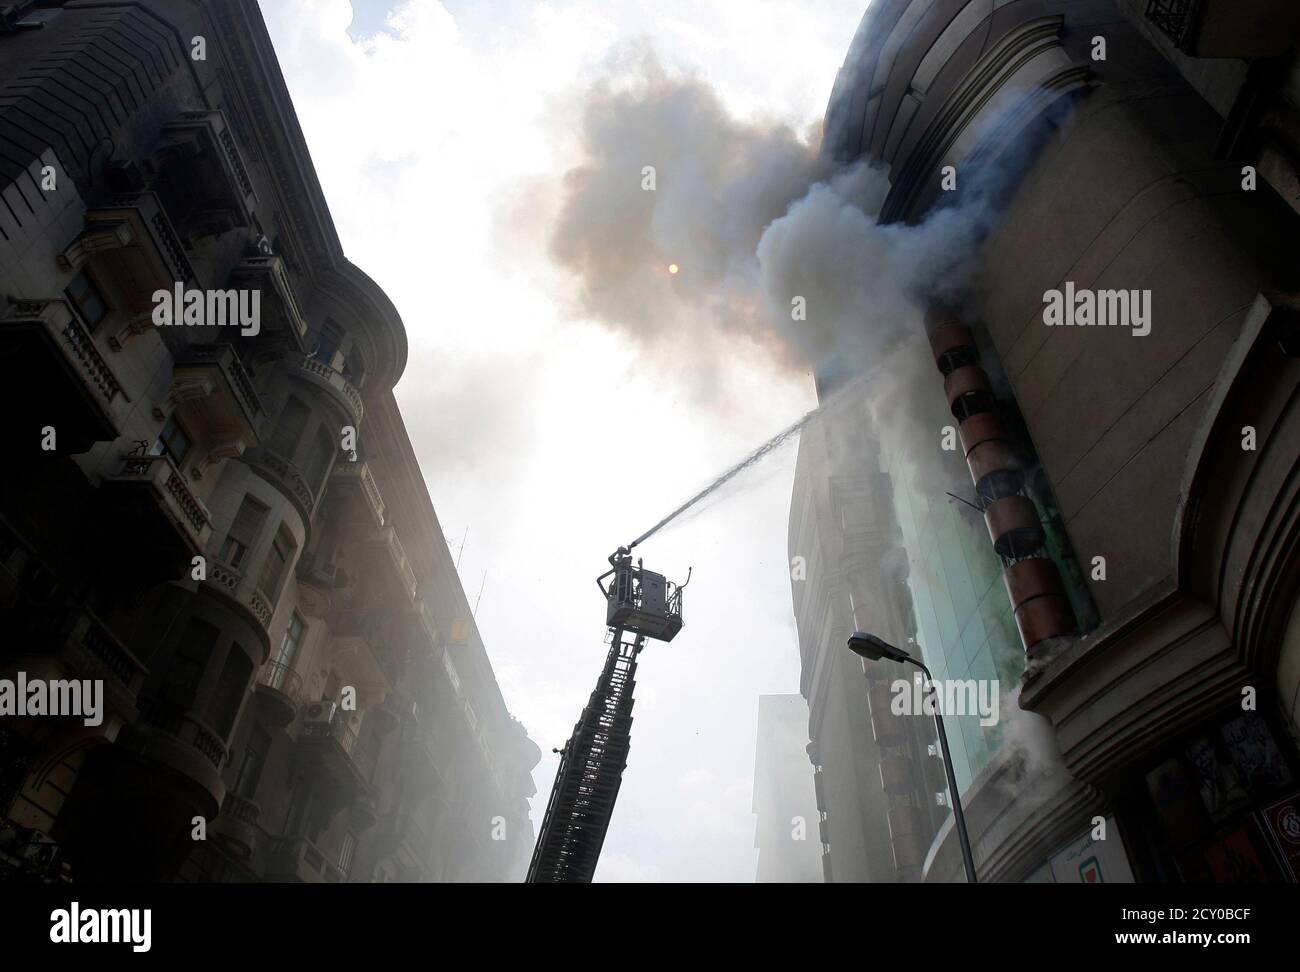 túnel Camello Sinceramente A fire-fighter works to extinguish a fire at Talaat Harb Mall in the  country's central business district in downtown Cairo March 17, 2013. The  state news agency MENA quoted witnesses as saying